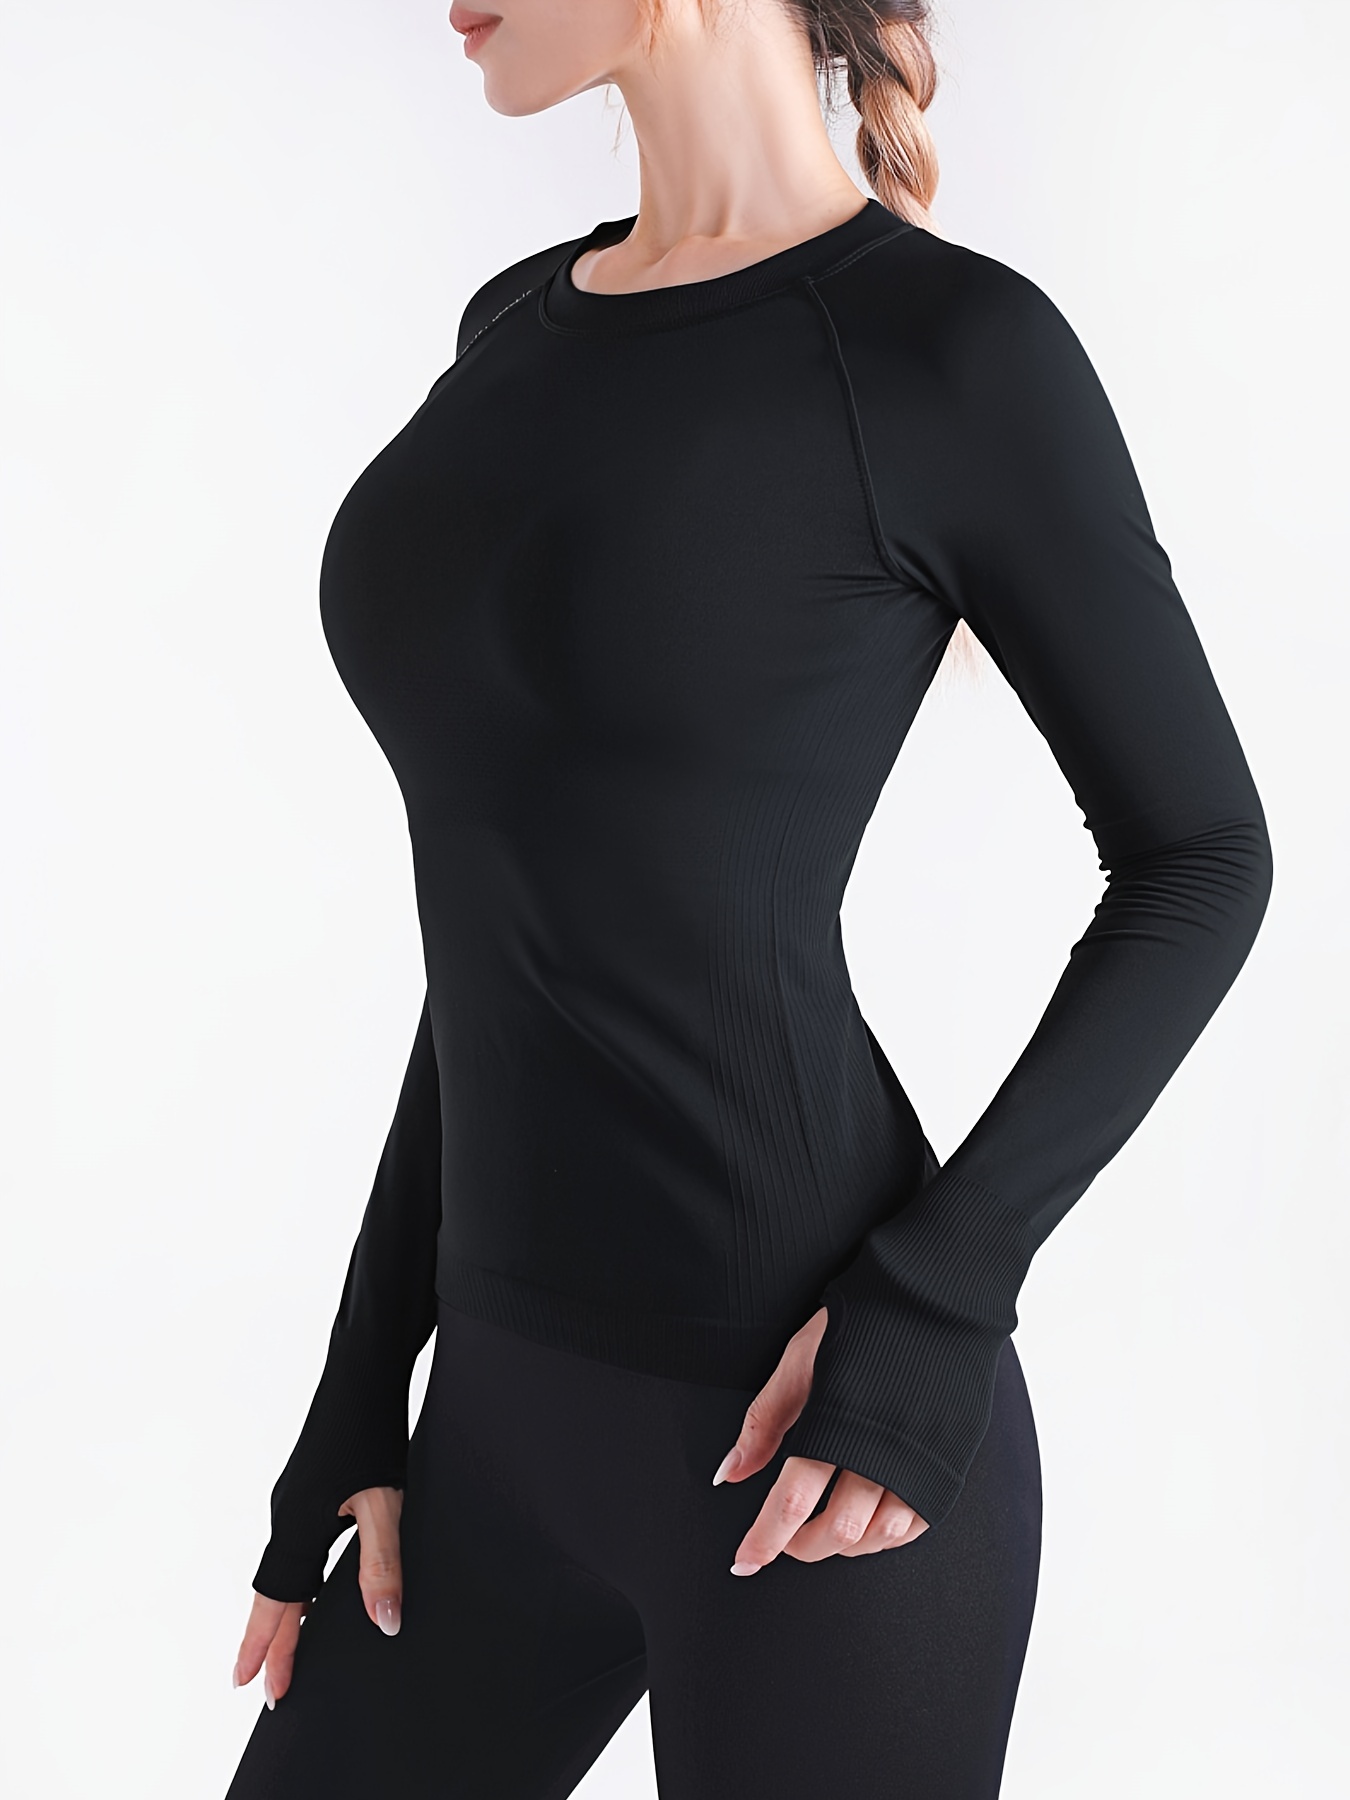 WYPDE Seamless Yoga Shirts Women Quick Dry Running Tops Tight